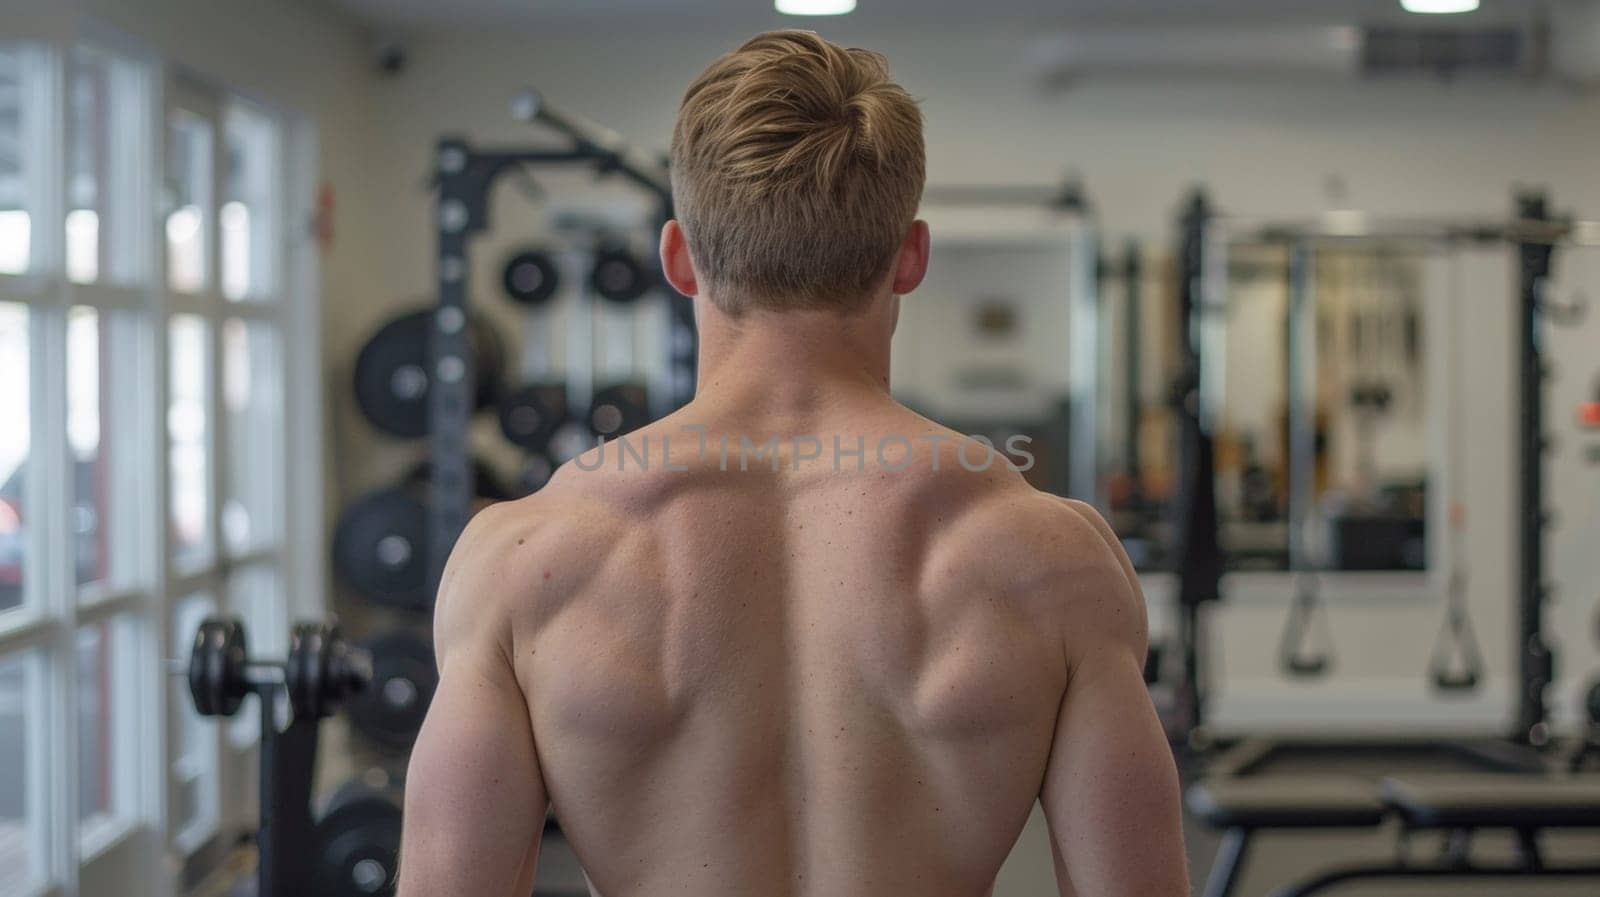 A man in a gym with his back to the camera